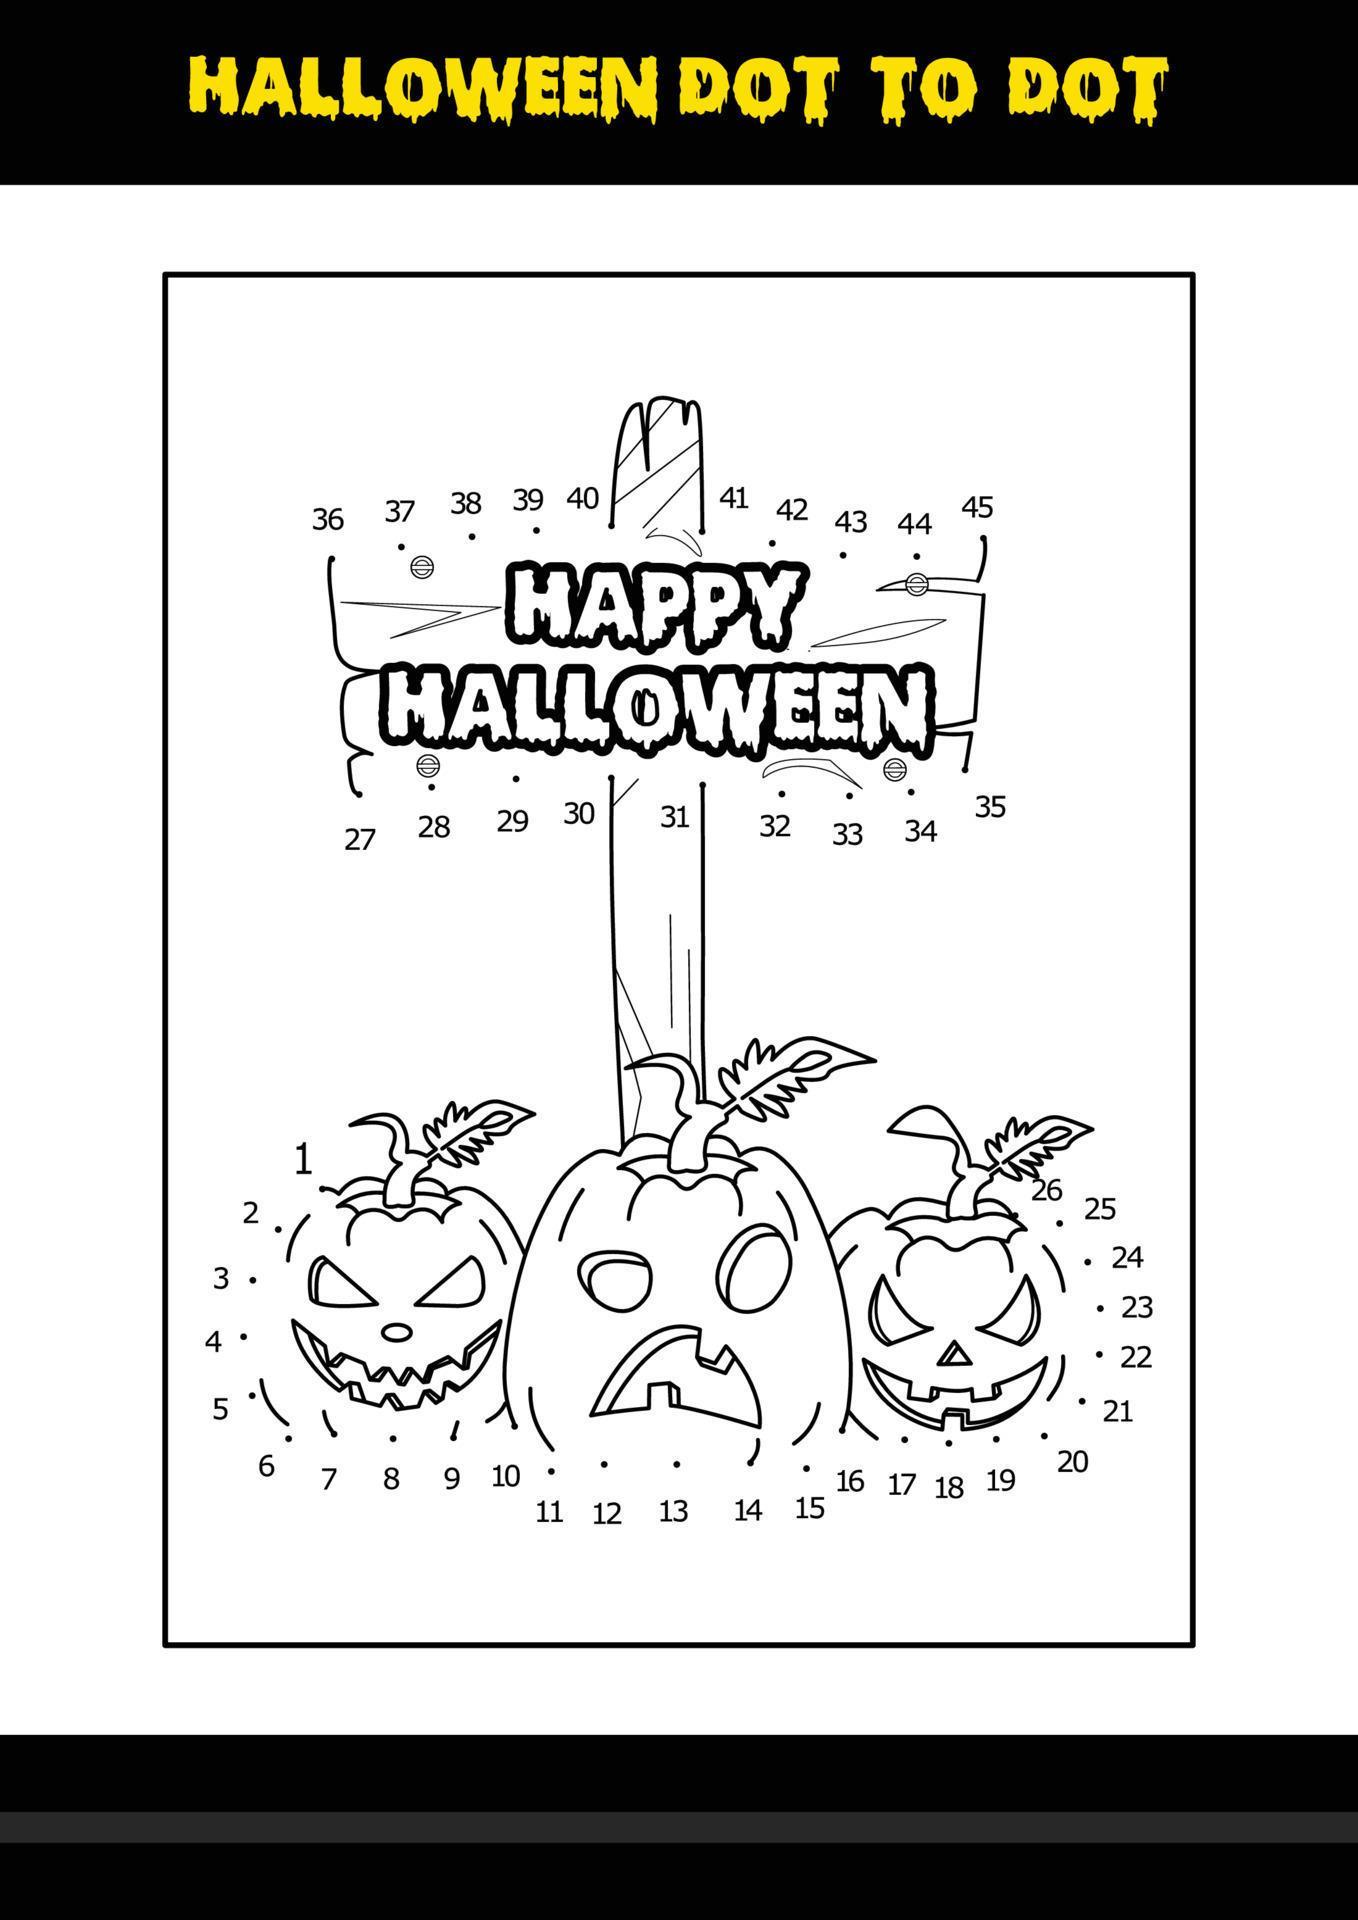 halloween-dot-to-dot-coloring-page-for-kids-line-art-coloring-page-design-for-kids-12136302